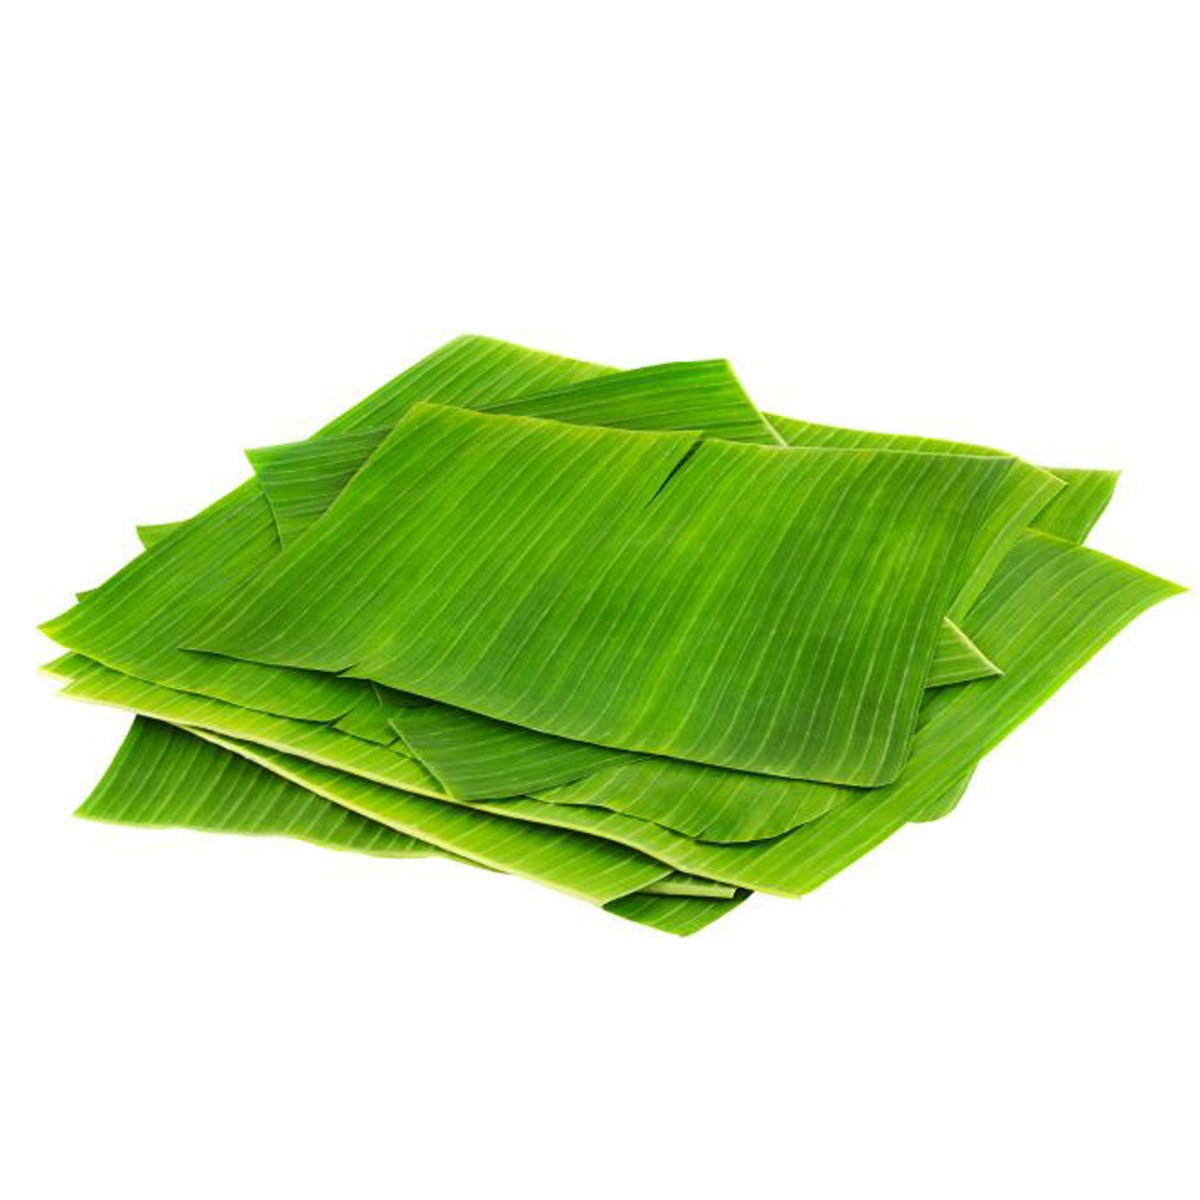 Banana Leaves 250g Approx. Weight